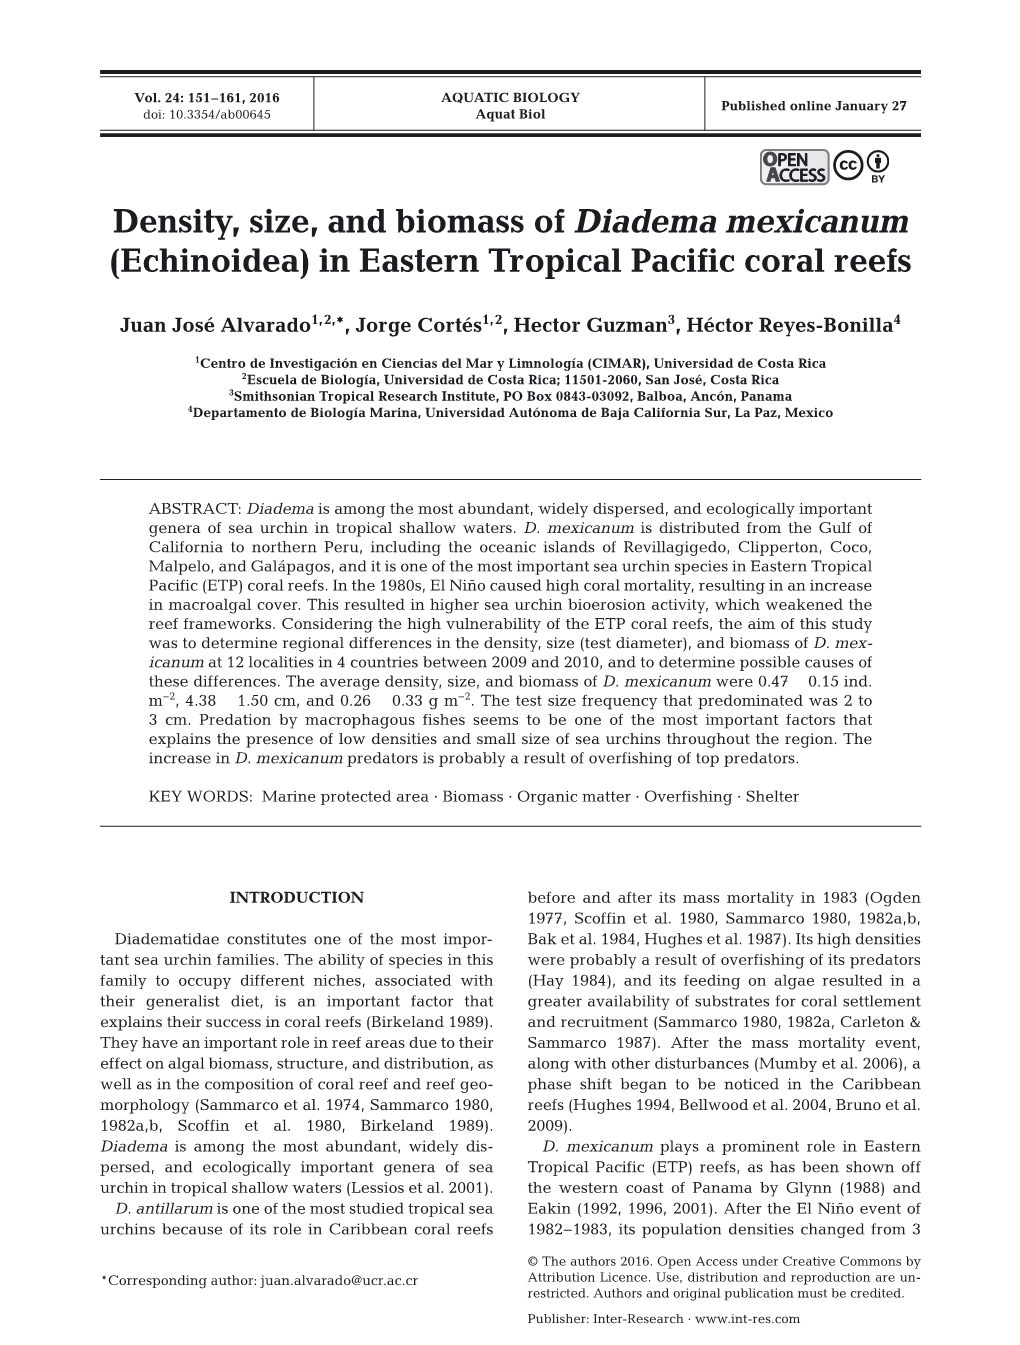 Density, Size, and Biomass of Diadema Mexicanum (Echinoidea) in Eastern Tropical Pacific Coral Reefs